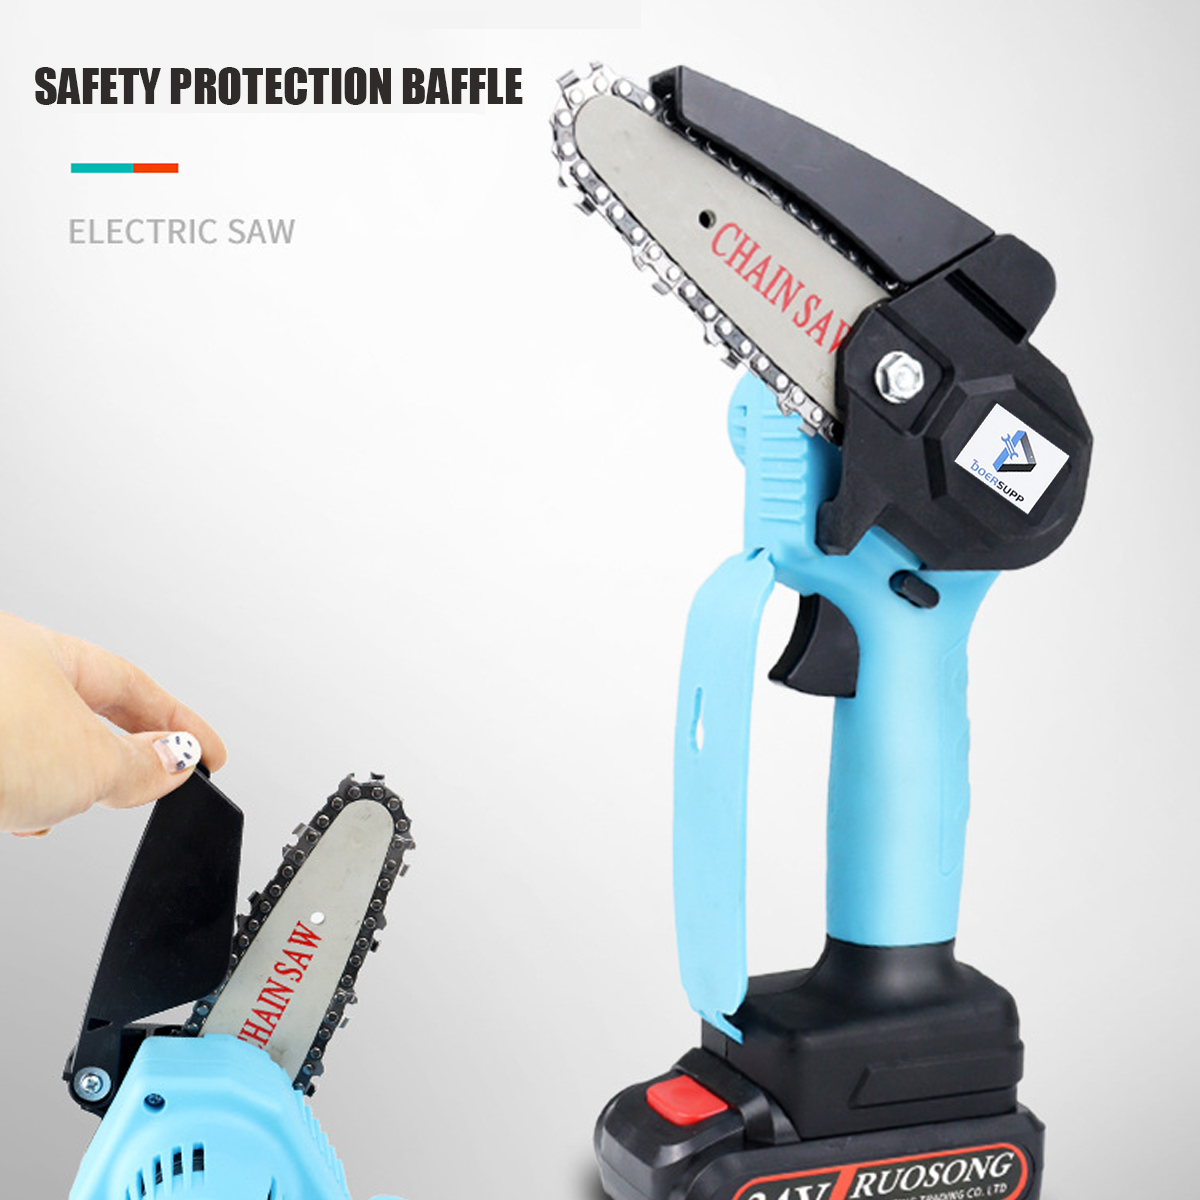 1000W-4Inch-Cordless-Electric-Chain-Saw-Wood-Mini-Cutter-One-Hand-Saw-Woodworking-Tool-W-None1pc-Bat-1833244-4